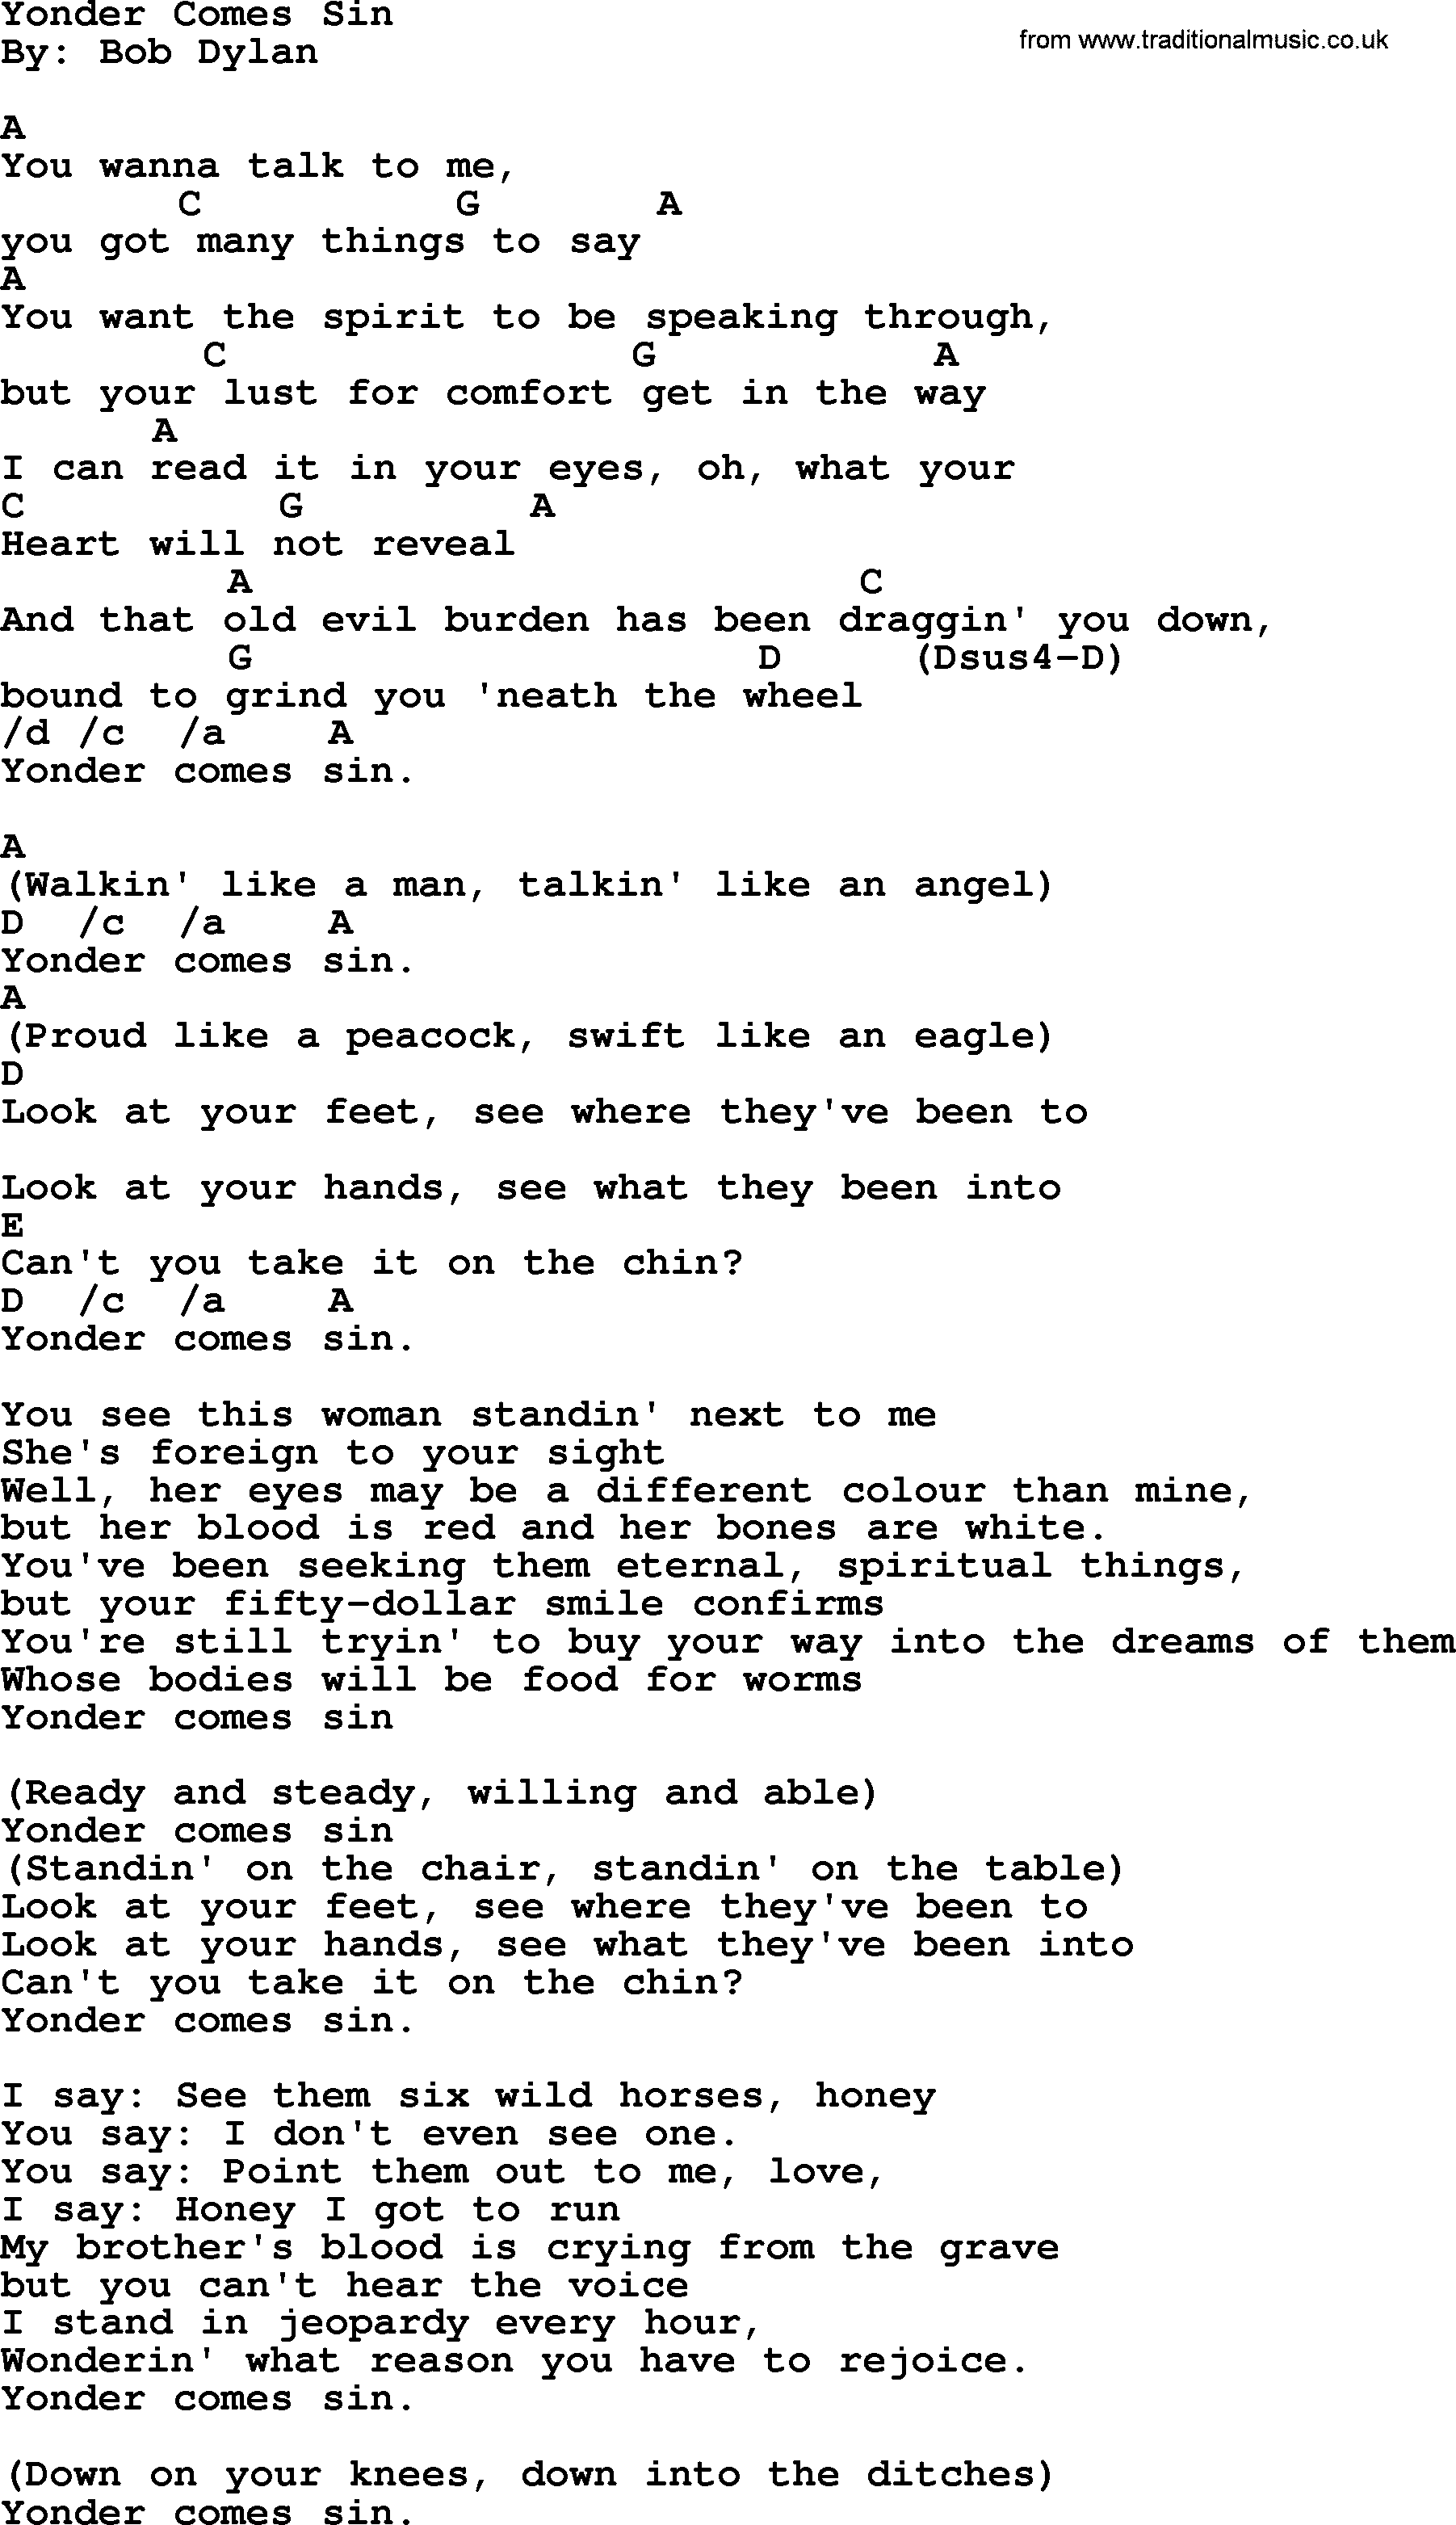 Bob Dylan song, lyrics with chords - Yonder Comes Sin